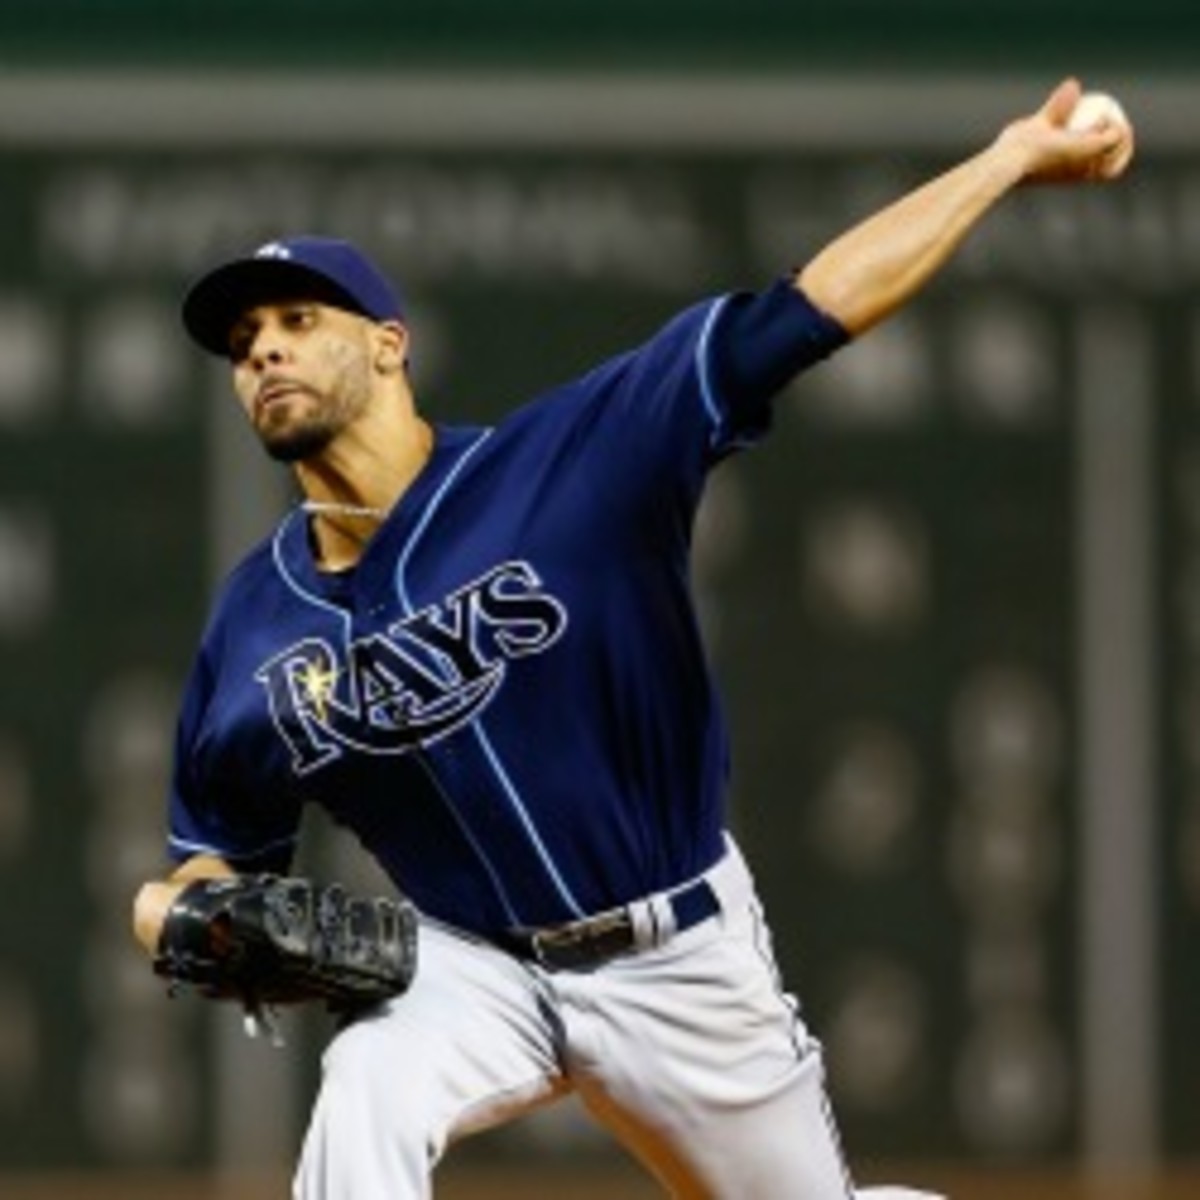 Rays pitcher David Price will be eligible for free agency after the 2015 season. (Jared Wickerham/Getty Images)